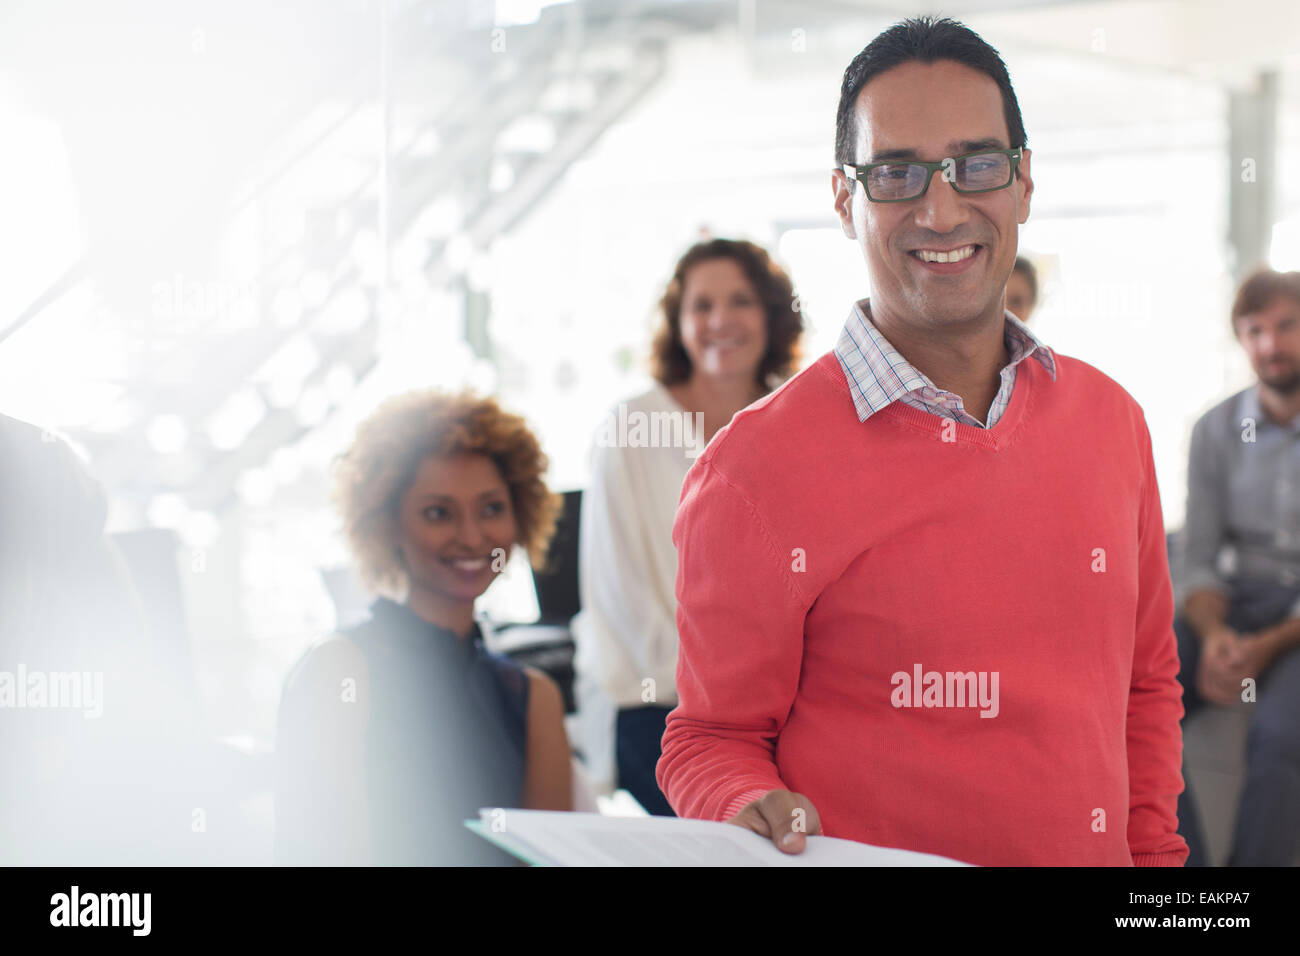 Portrait of smiling businessman wearing glasses and pink sweatshirt with team in background Stock Photo